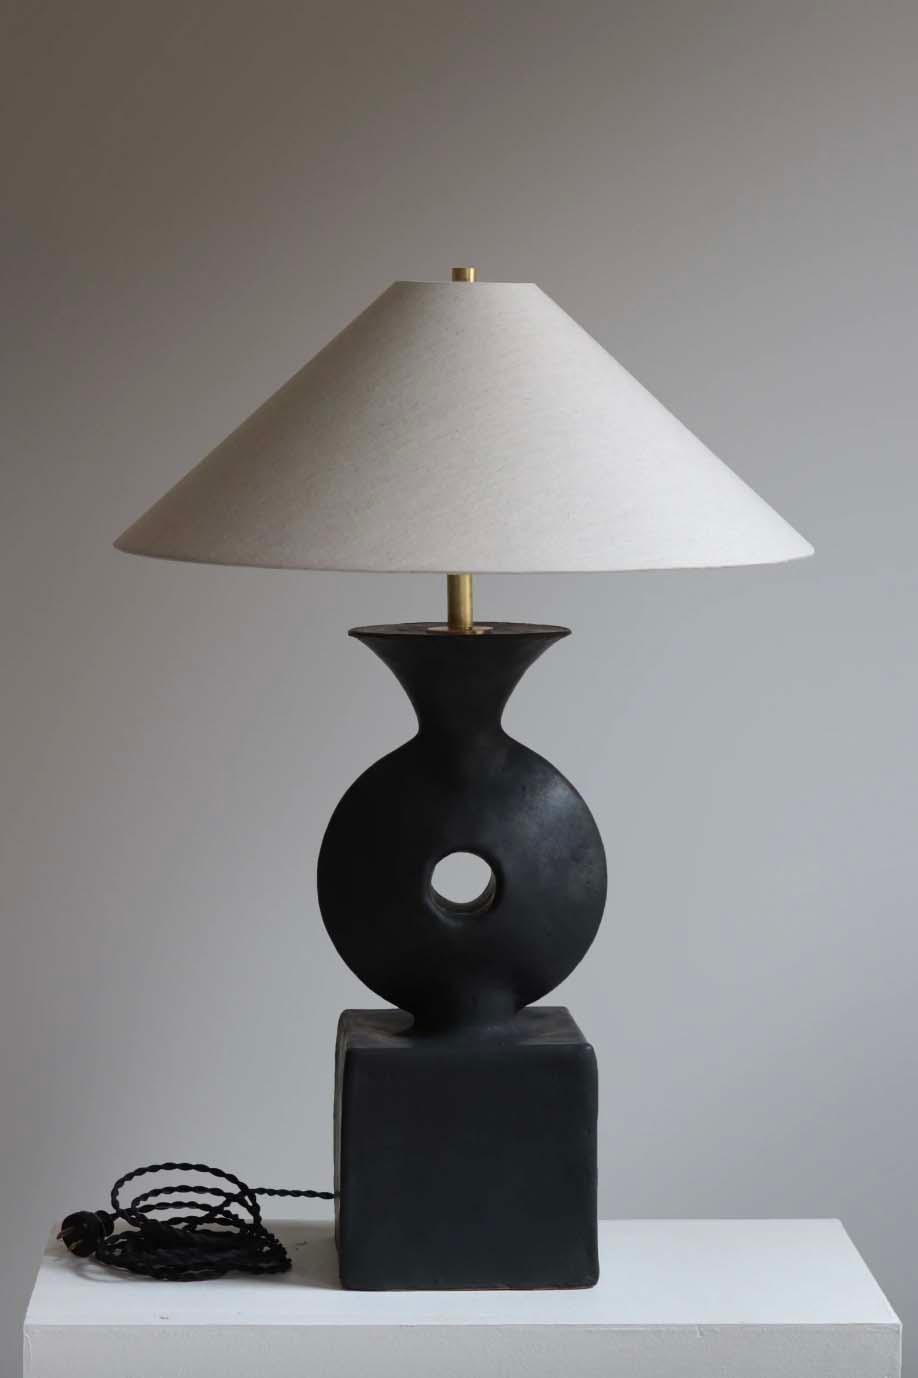 The Felix lamp is handmade studio pottery by ceramic artist by Danny Kaplan. Shade included. Please note exact dimensions may vary.

Born in New York City and raised in Aix-en-Provence, France, Danny Kaplan’s passion for ceramics was shaped by early